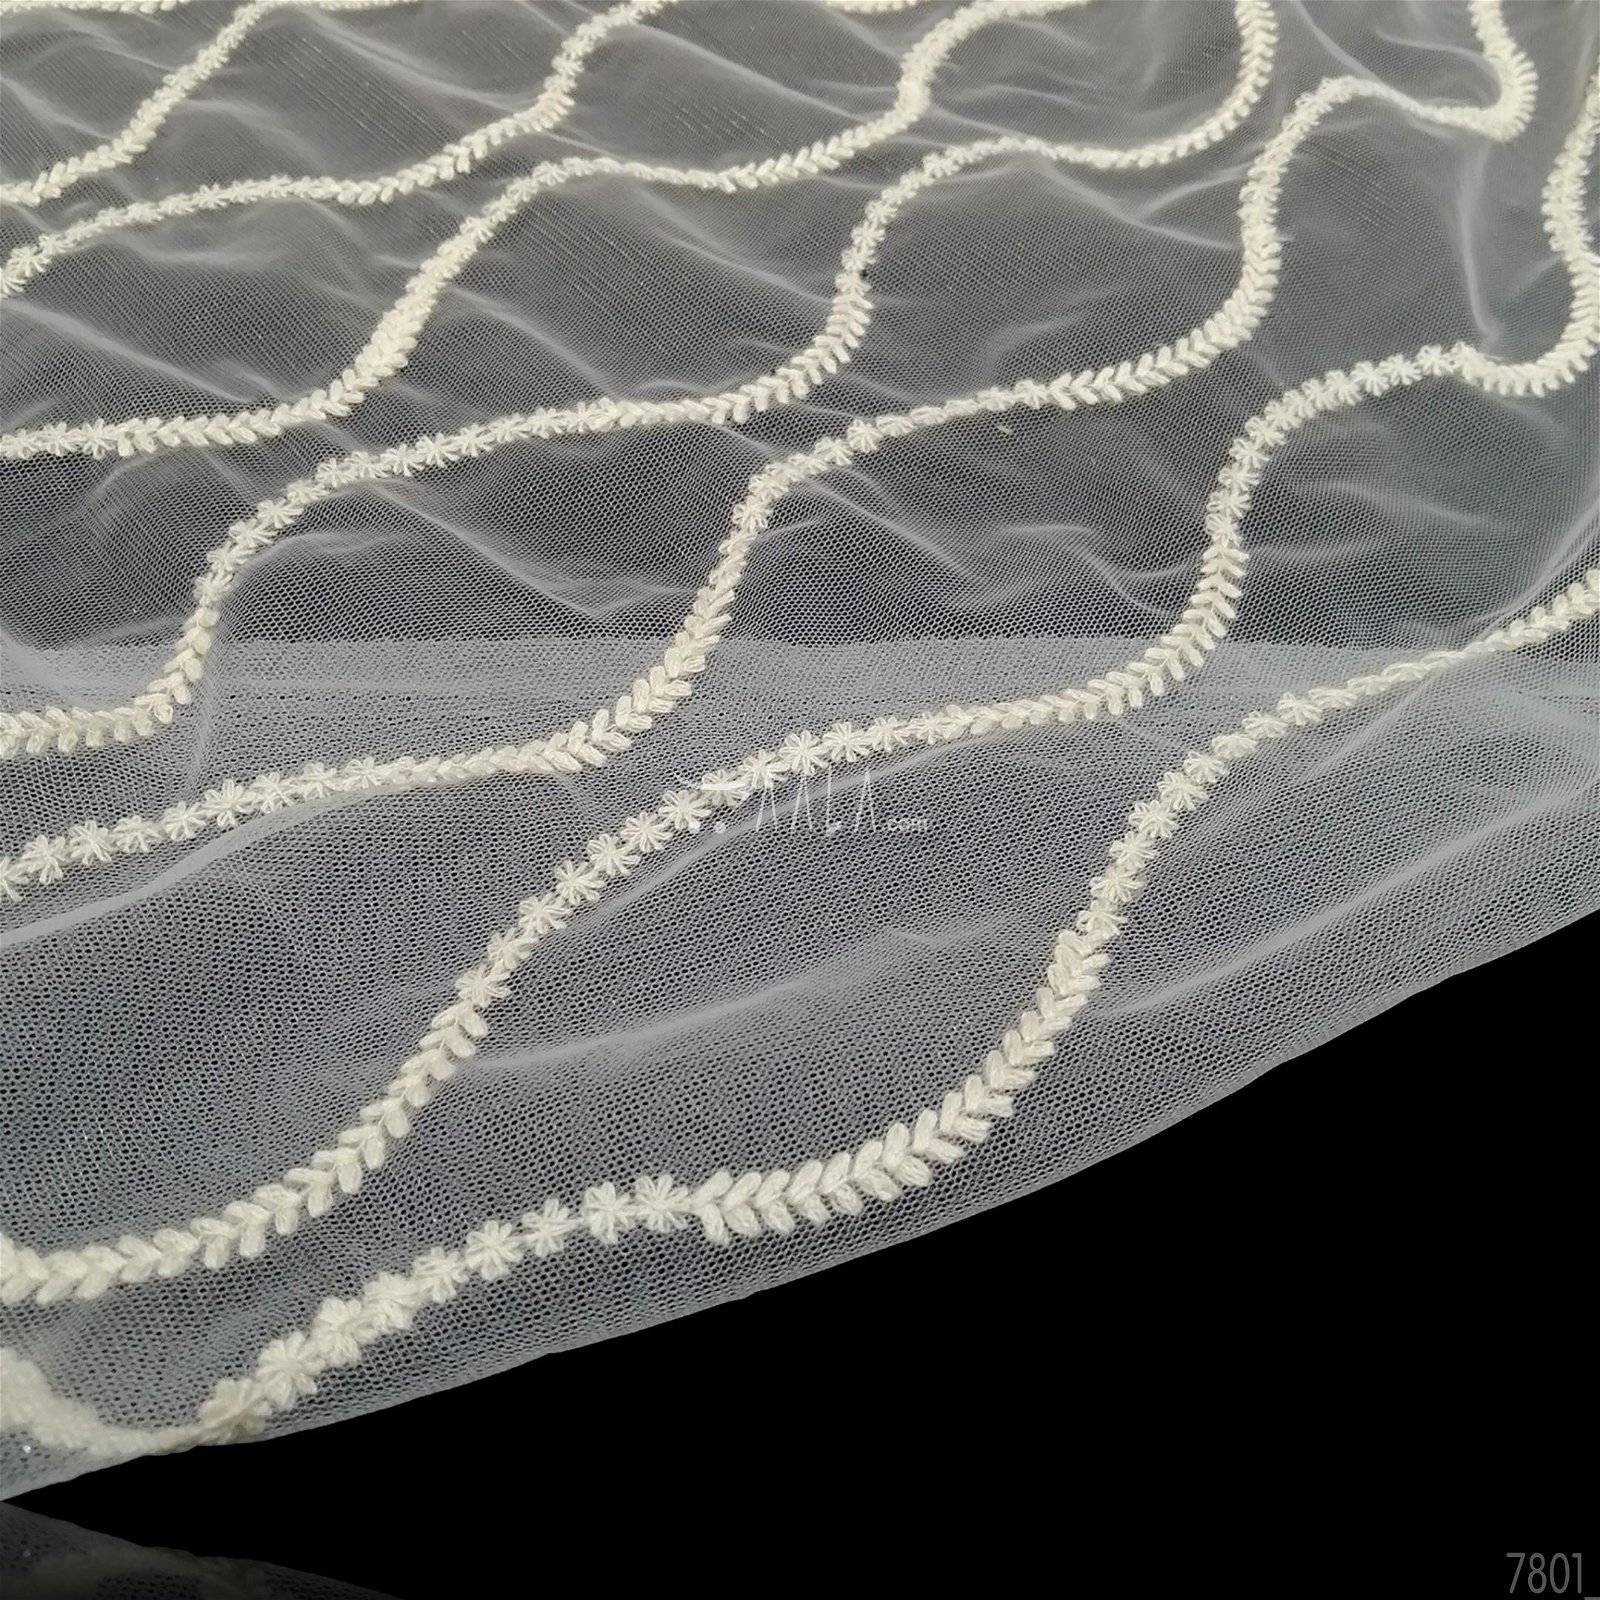 Embroidered Net Nylon 44-Inches DYEABLE Per-Metre #7801
